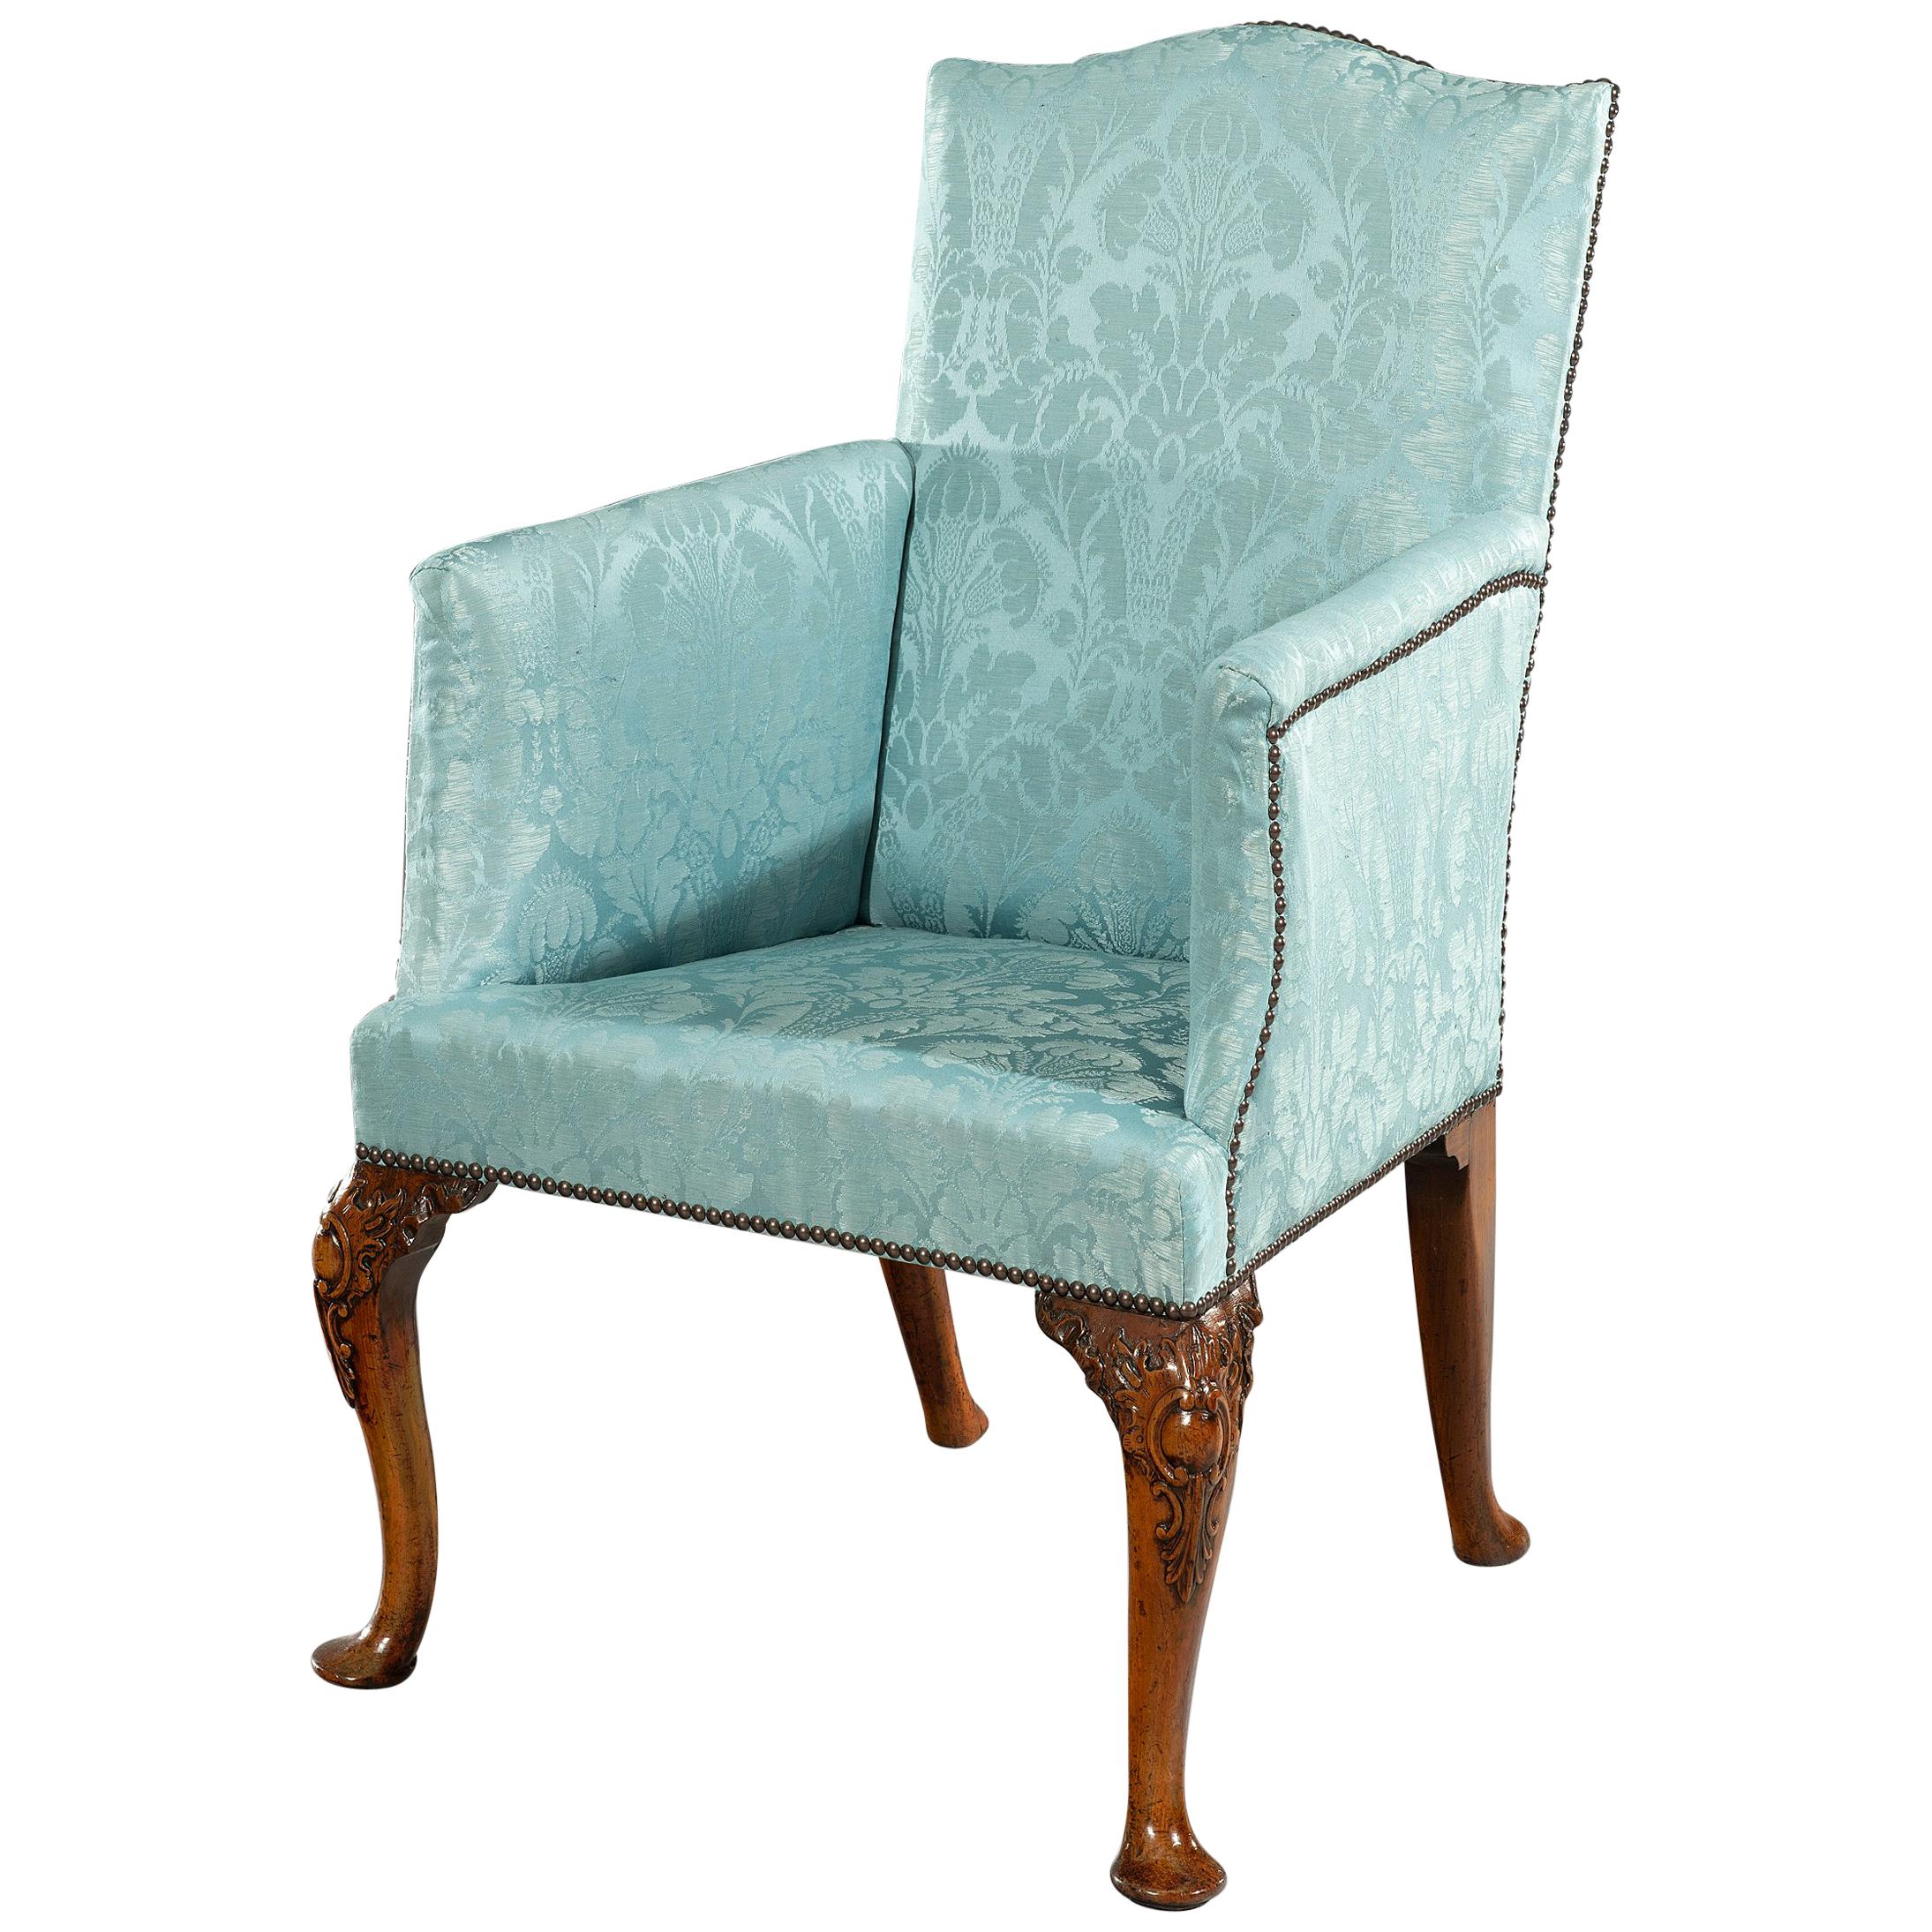 Early 18th Century Queen Anne Period Walnut Armchair For Sale